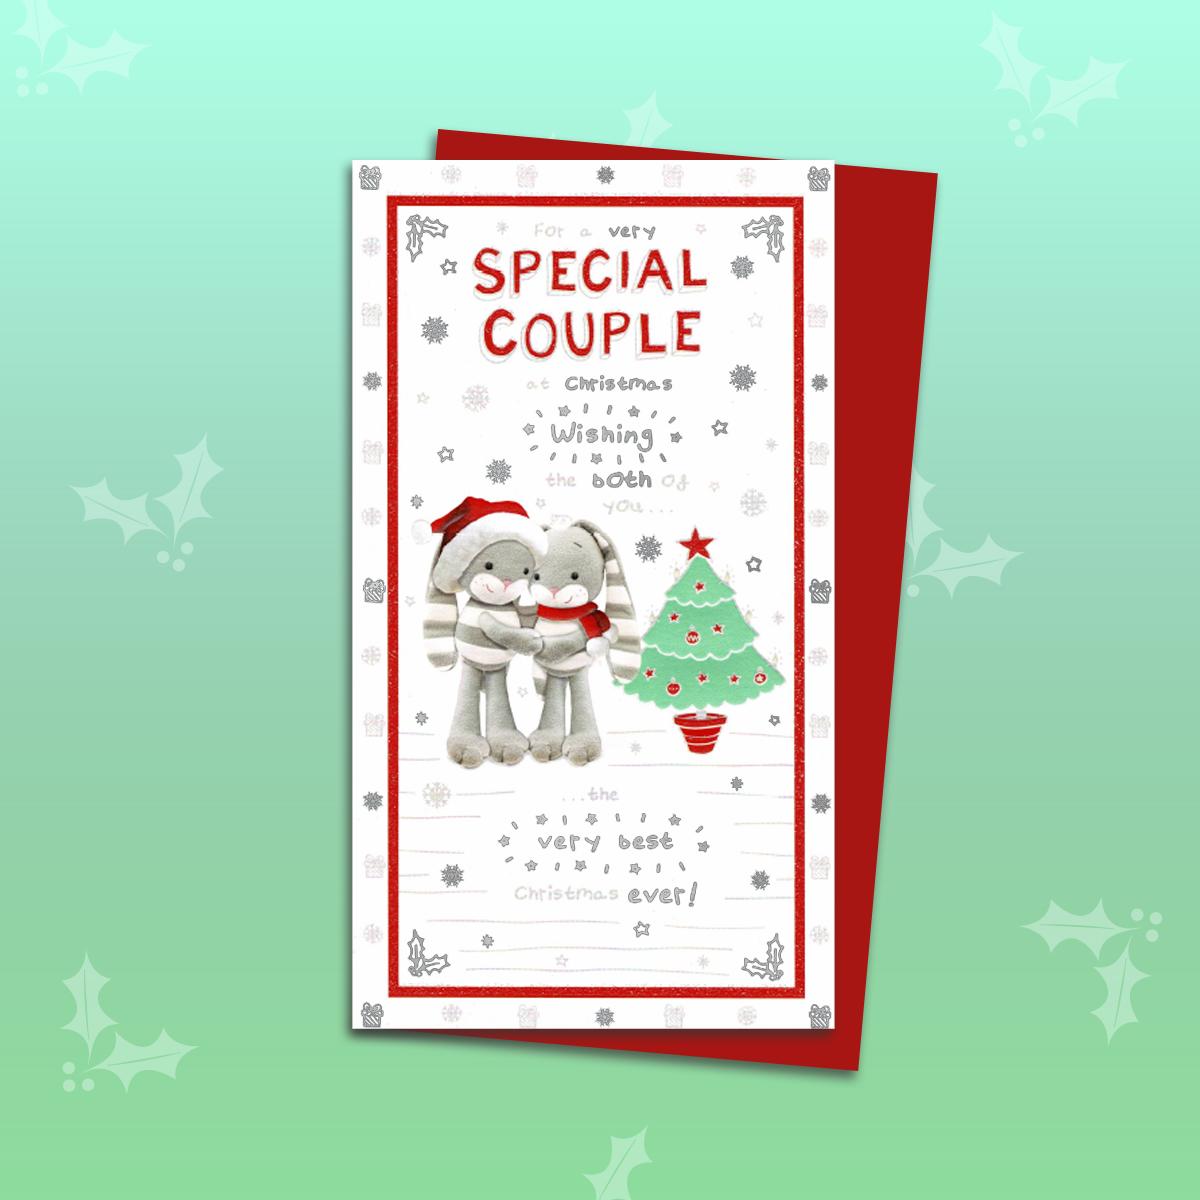 Special Couple Christmas Card Alongside Its Red Envelope